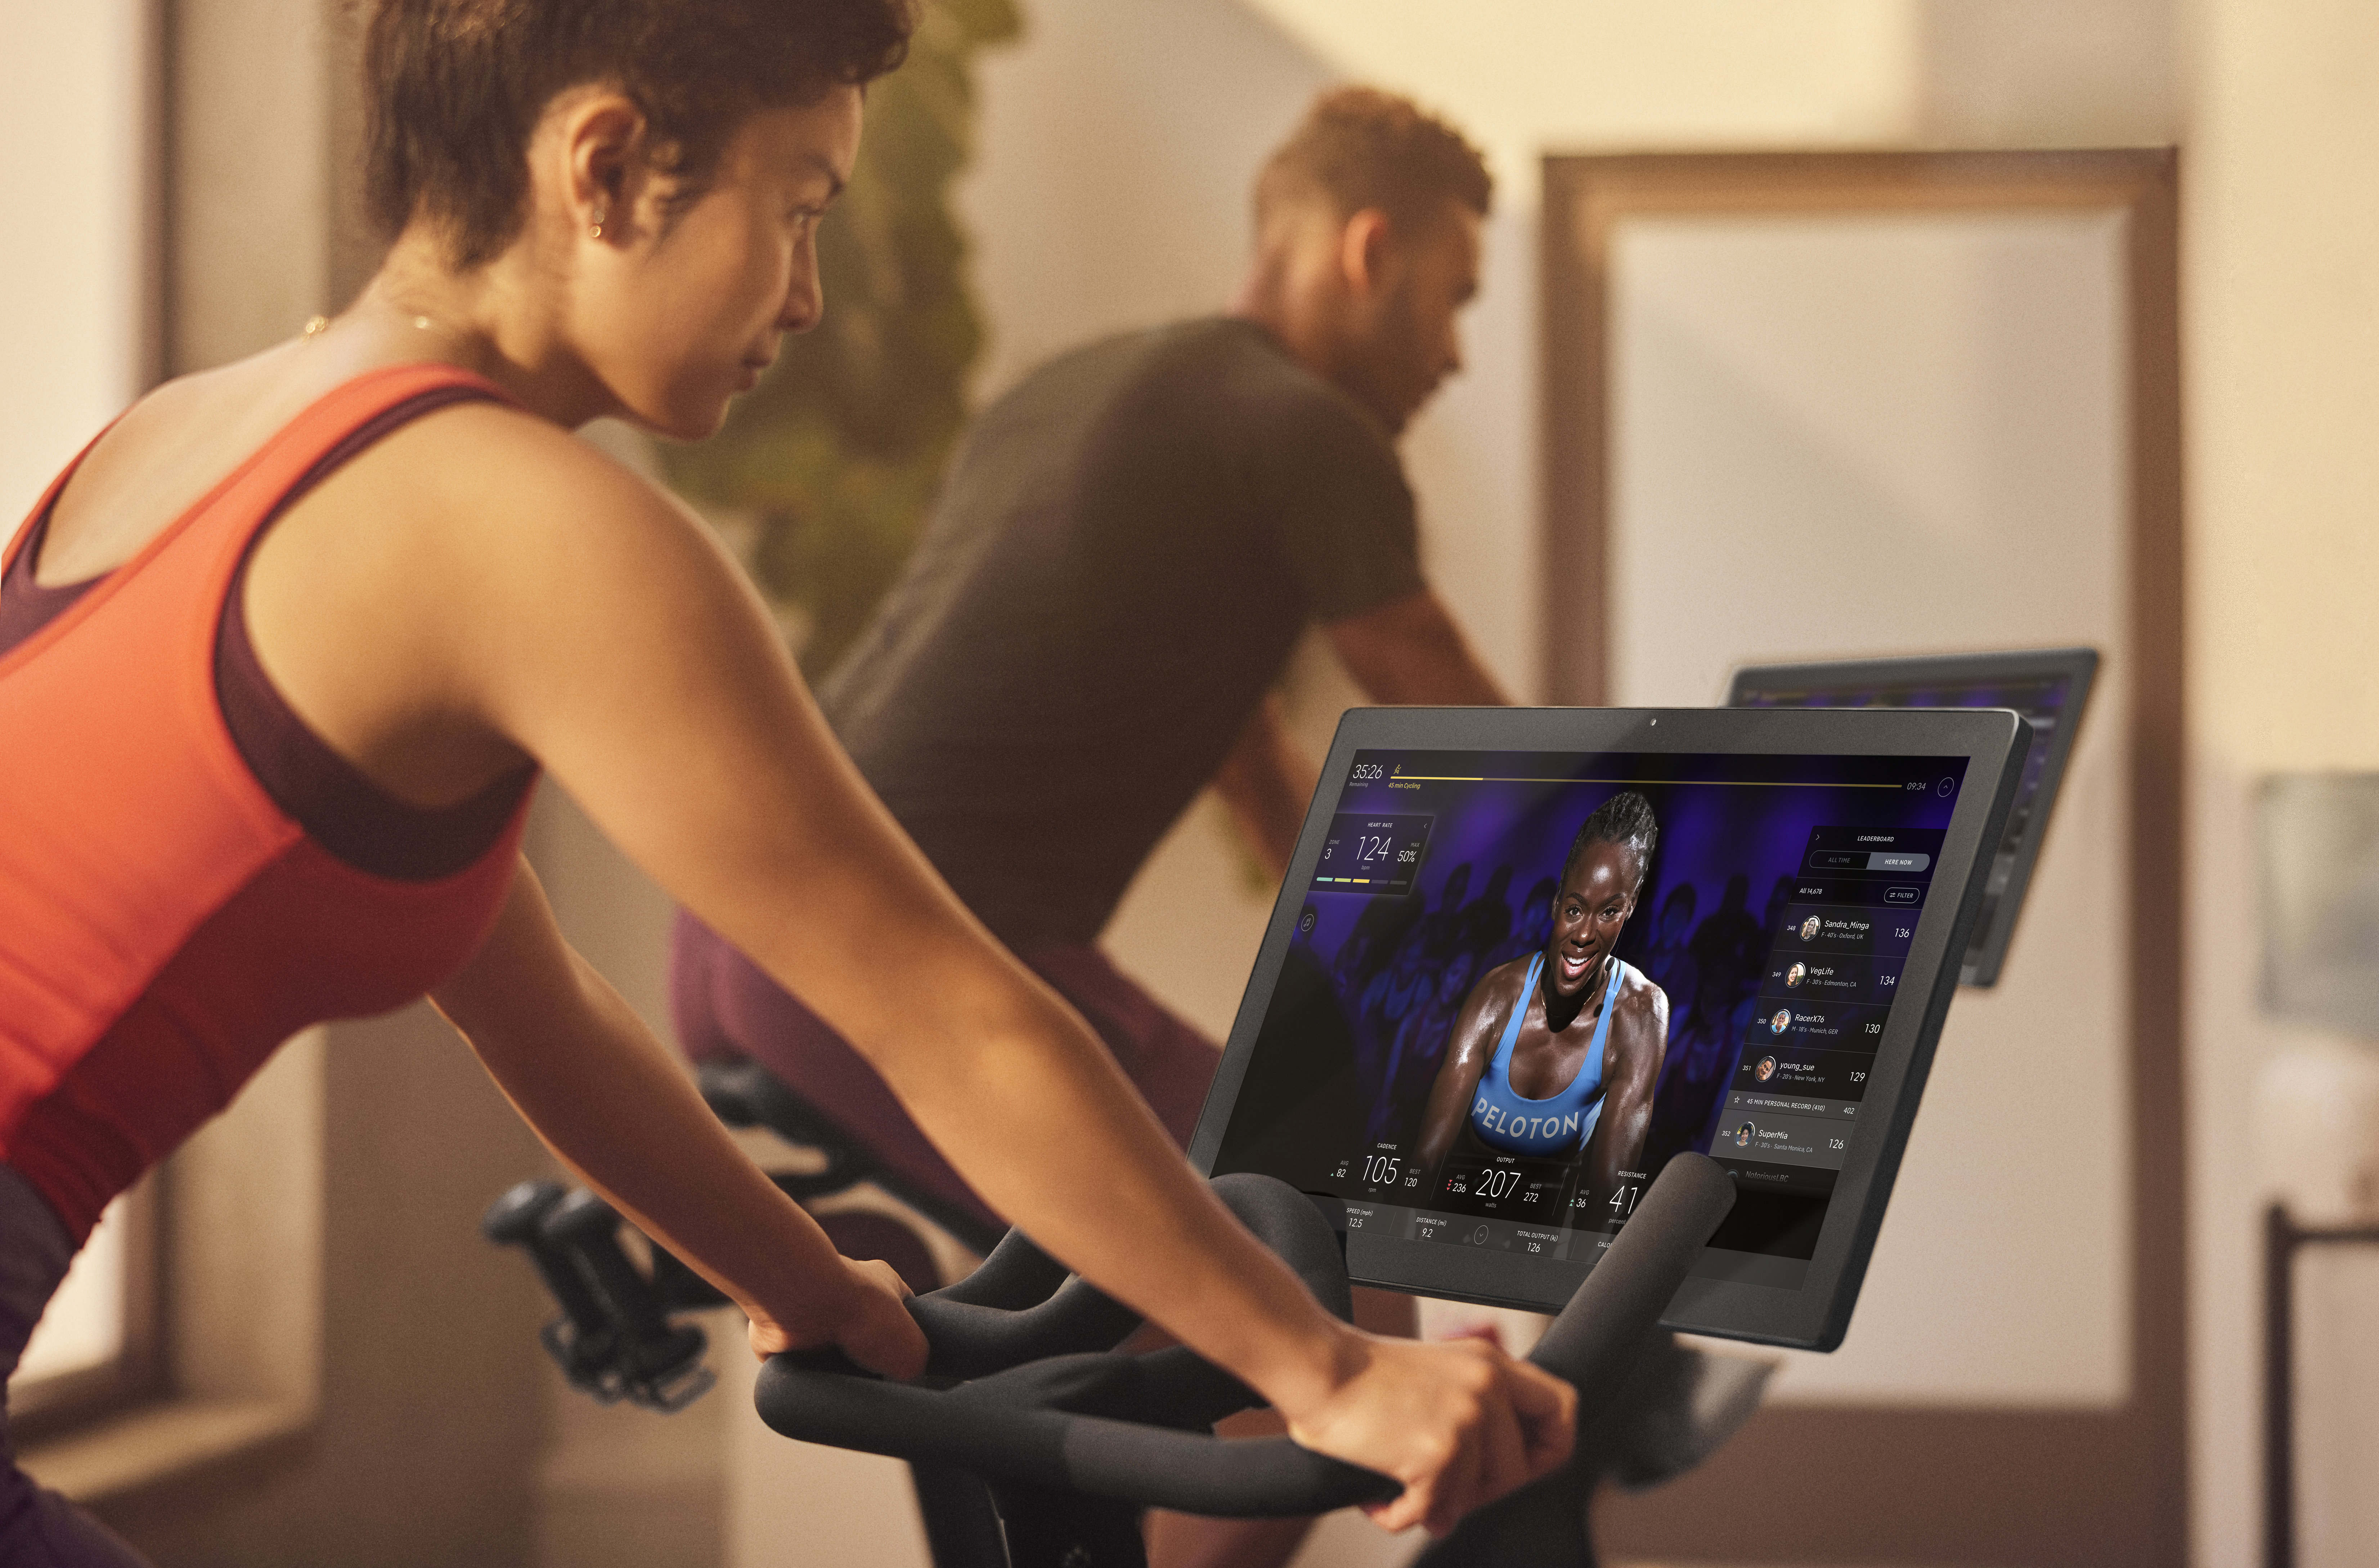 Our New York hotel with Peloton bike is great for staying active.